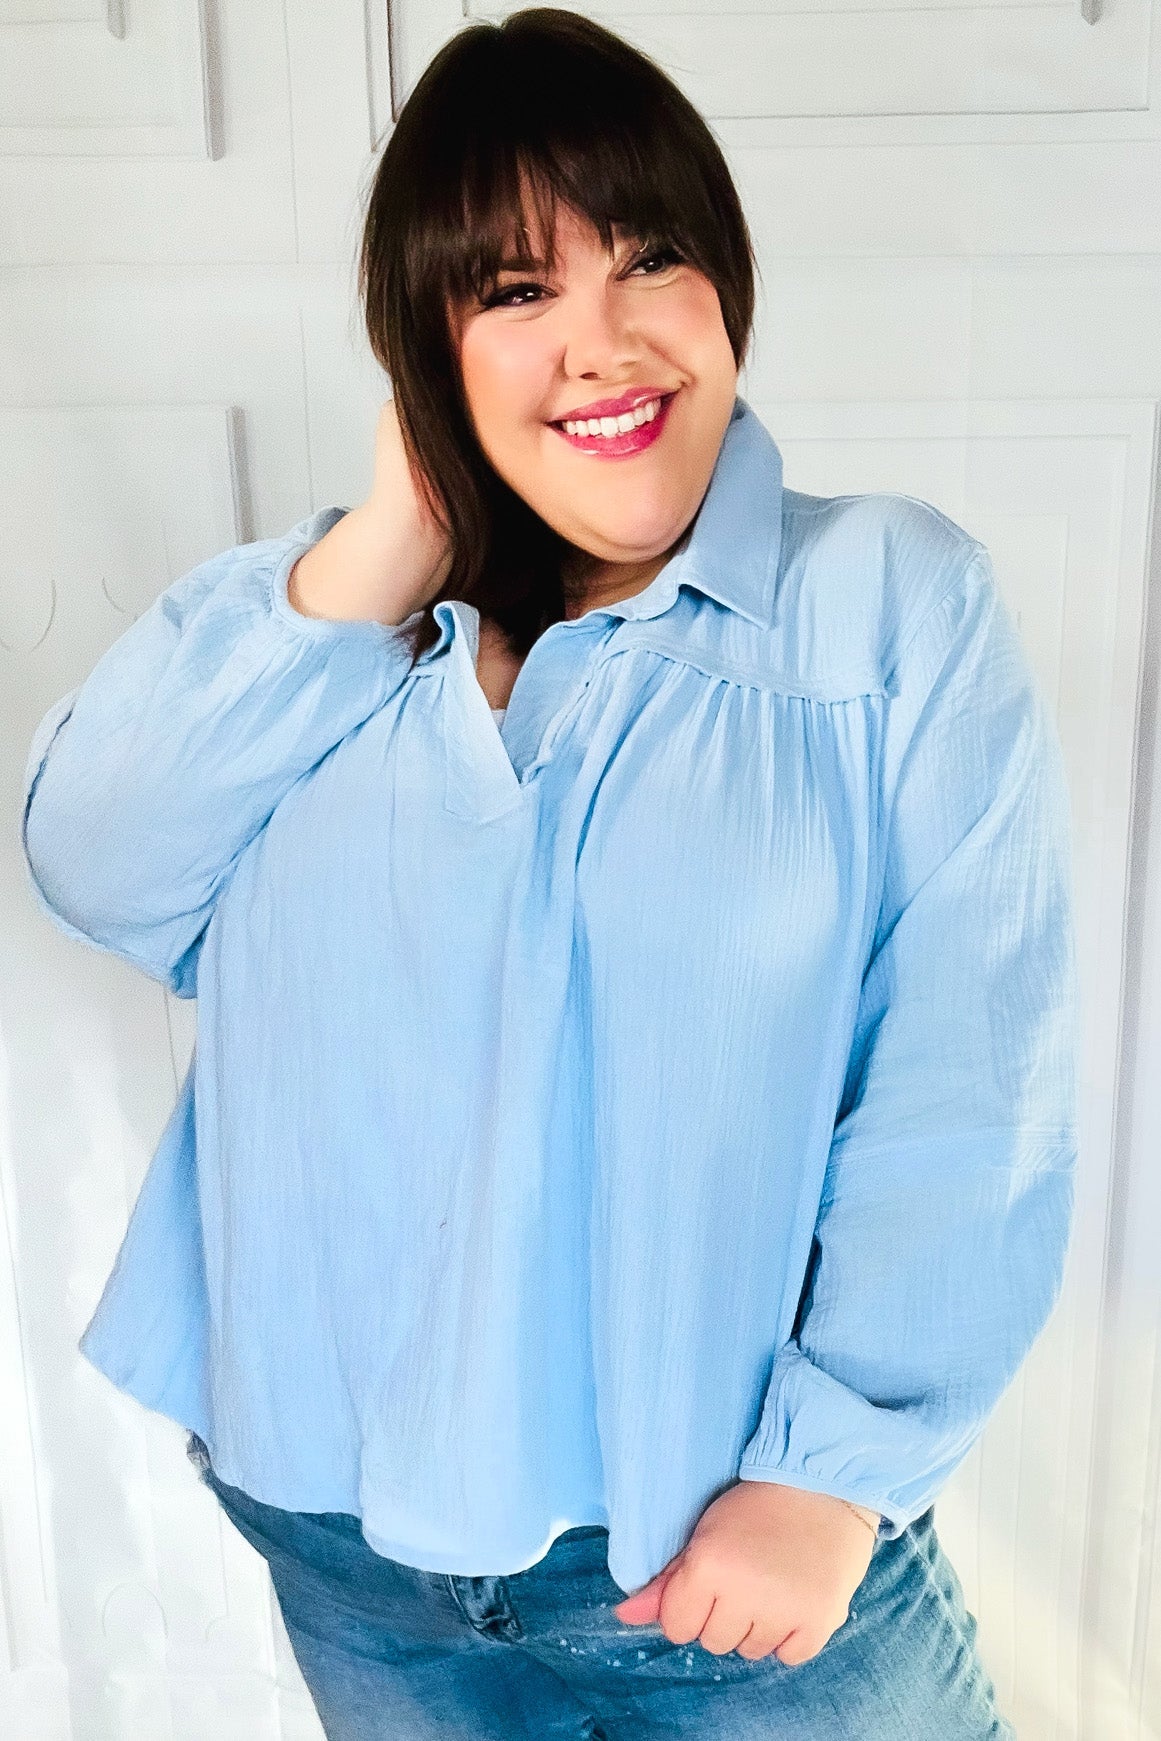 Women's Tops & Blouses – Tagged Notch Neck – Broderick's Clothing Co.